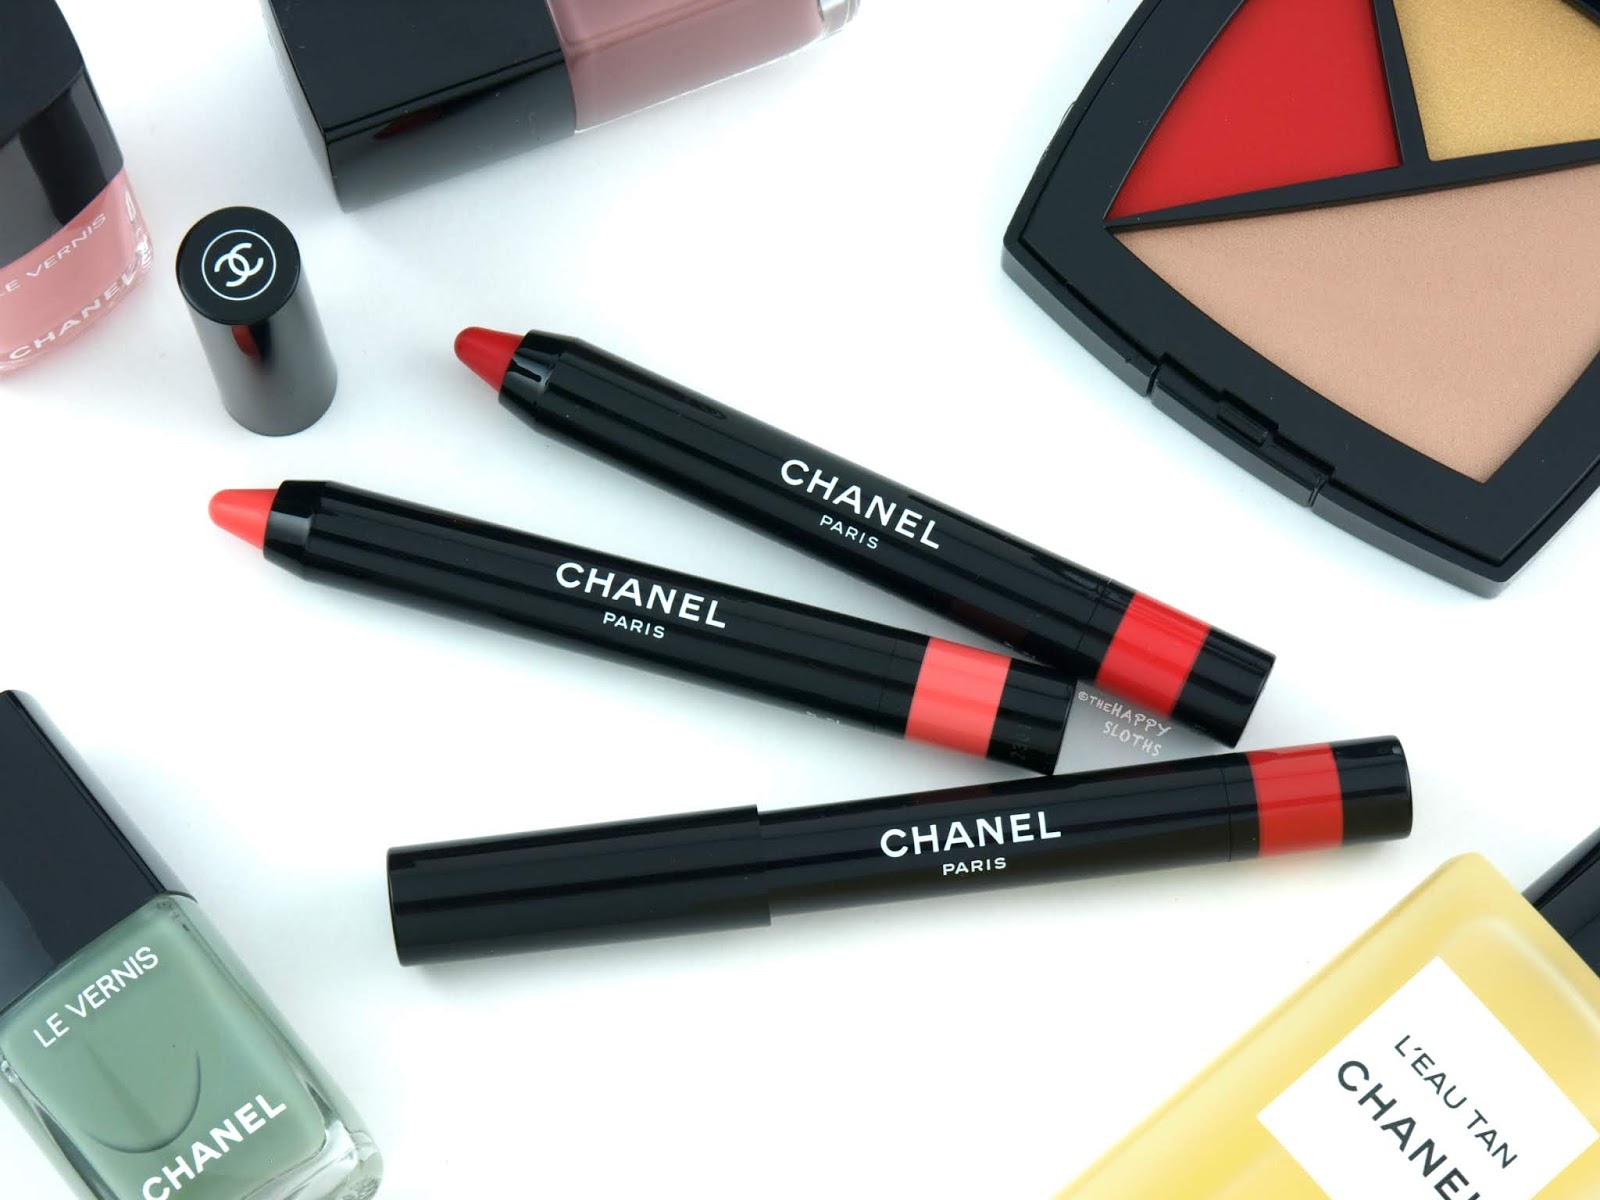 Chanel Cruise 2018 | Le Rouge Jumbo Longwear Lip Crayon in "17 A La Rosee", "18 Rose Shocking", "20 Ultra Rose": Review and Swatches